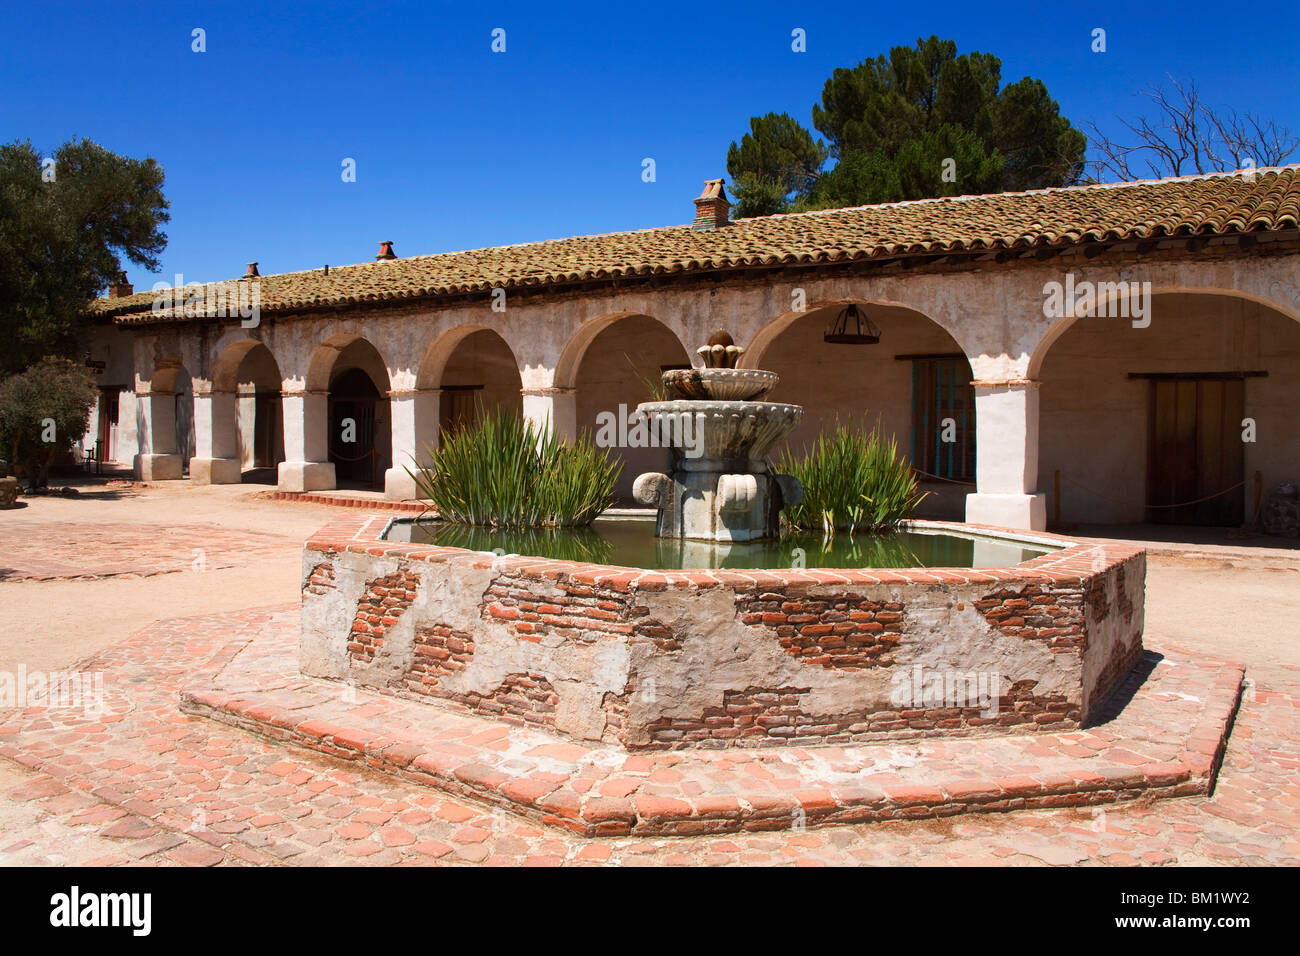 Courtyard fountain, Mission San Miguel Arcangel, San Miguel, California, United States of America, North America Stock Photo